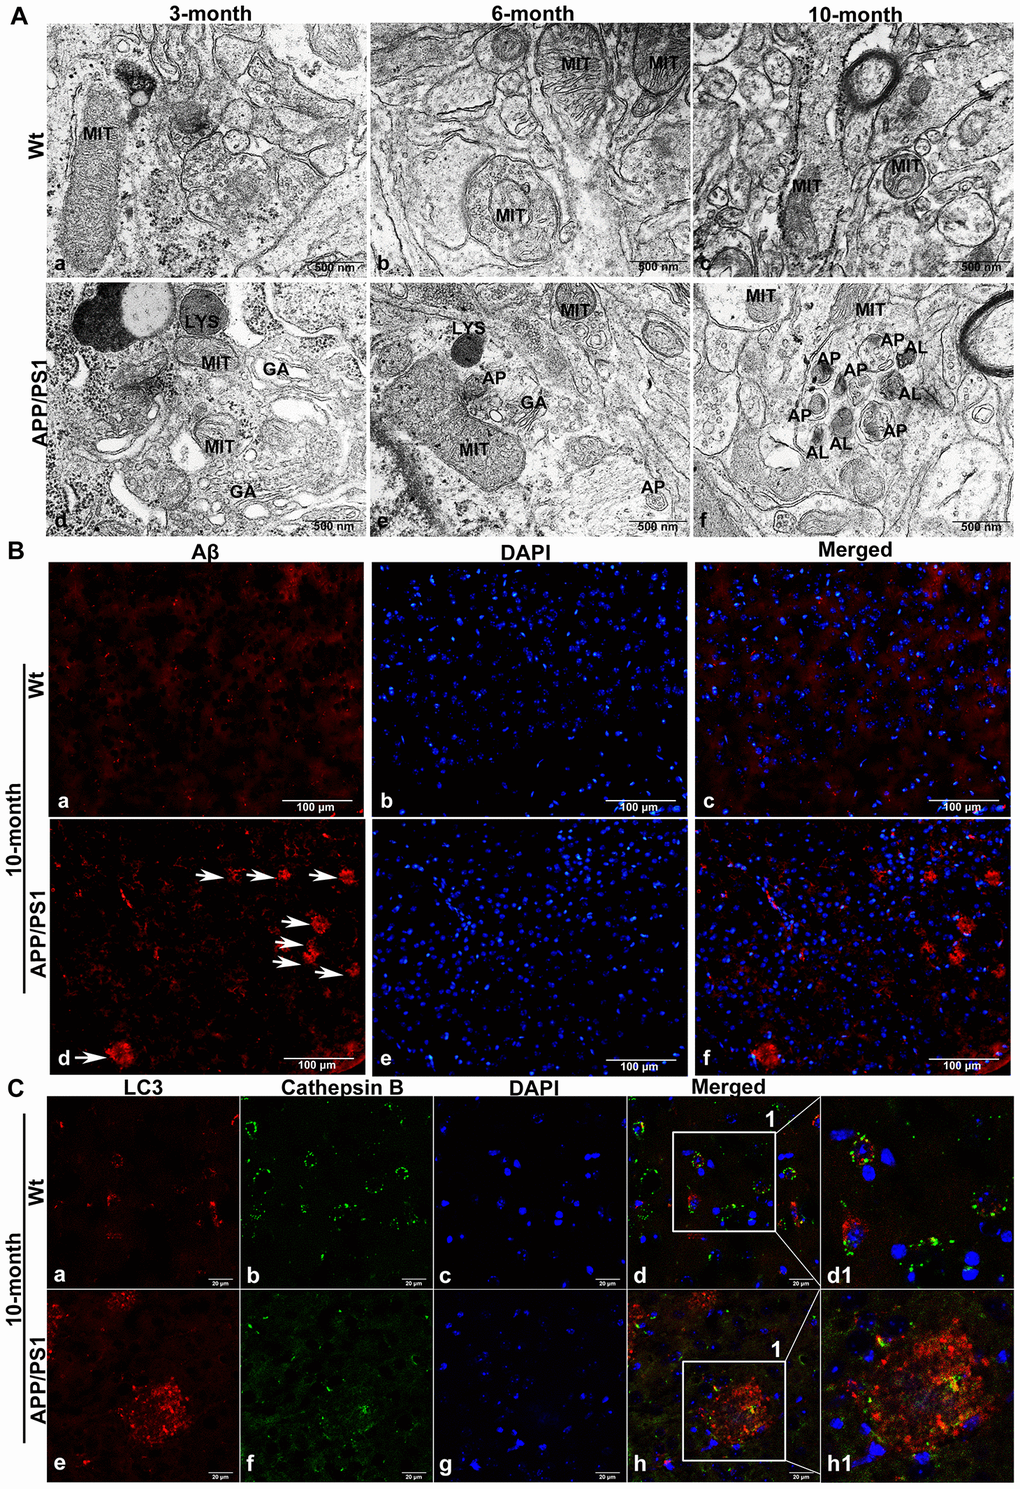 The accumulation of APs in the brain tissue of APP/PS1 DTg AD mice. (A) TEM showing little autophagy in wild-type (Wt) mice in the same litter (a-c); APs were also not easily observed in the brains of 3-month-old DTg mice (d); APs could be observed in the brains of 6-month-old DTg mice (e); a large number of APs and ALs had accumulated in the damaged axonal of brain in 10-month-old DTg mice (f). AL: autolysosome, AP: autophagosome, GA: Golgi apparatus, LYS: lysosome, MIT: mitochondria, Scale bar = 500 nm. (B) anti-Aβ 4G8 immunofluorescence staining showing no SPs in the cortex of the wild-type mice (a-c), while many SPs formed by the excessive accumulation of Aβ outside the cells in the cortex of DTg mice, (d-f, The arrow represents SP). Scale bar = 100 μm. (C) Double immunofluorescence staining showing that compared with that in Wt mice (a-d1), the expression of LC3 in 10-month-old APP/PS1 DTg mice increased significantly (e), the expression of CTSB decreased significantly (f), cell nuclei were counterstained with DAPI (g), and the co-expression of autophagosomal and lysosomal markers reduced (h). Scale bar = 20 μm, d1, h1 is a partial magnification of d and h.